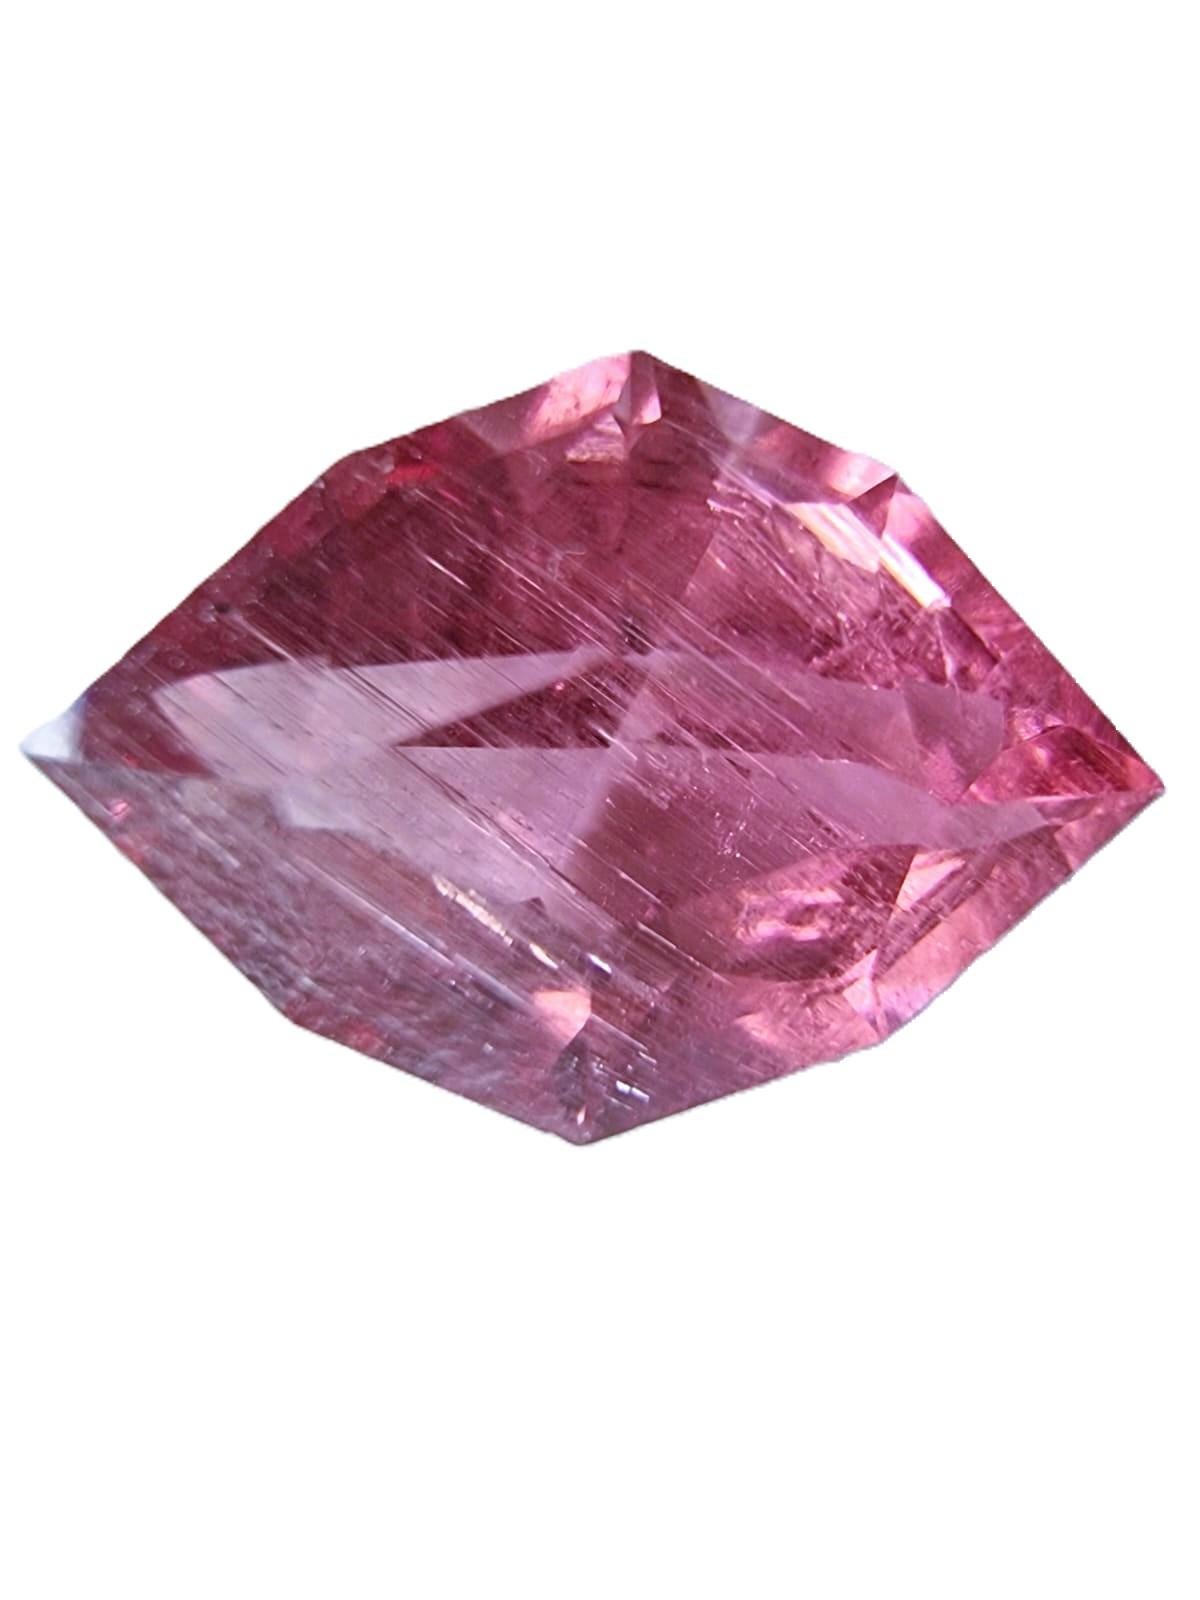 NO RESERVE 3.89ct Custom Marquis Rust Reddish PINK TOURMALINE Gemstone  In New Condition For Sale In Sheridan, WY